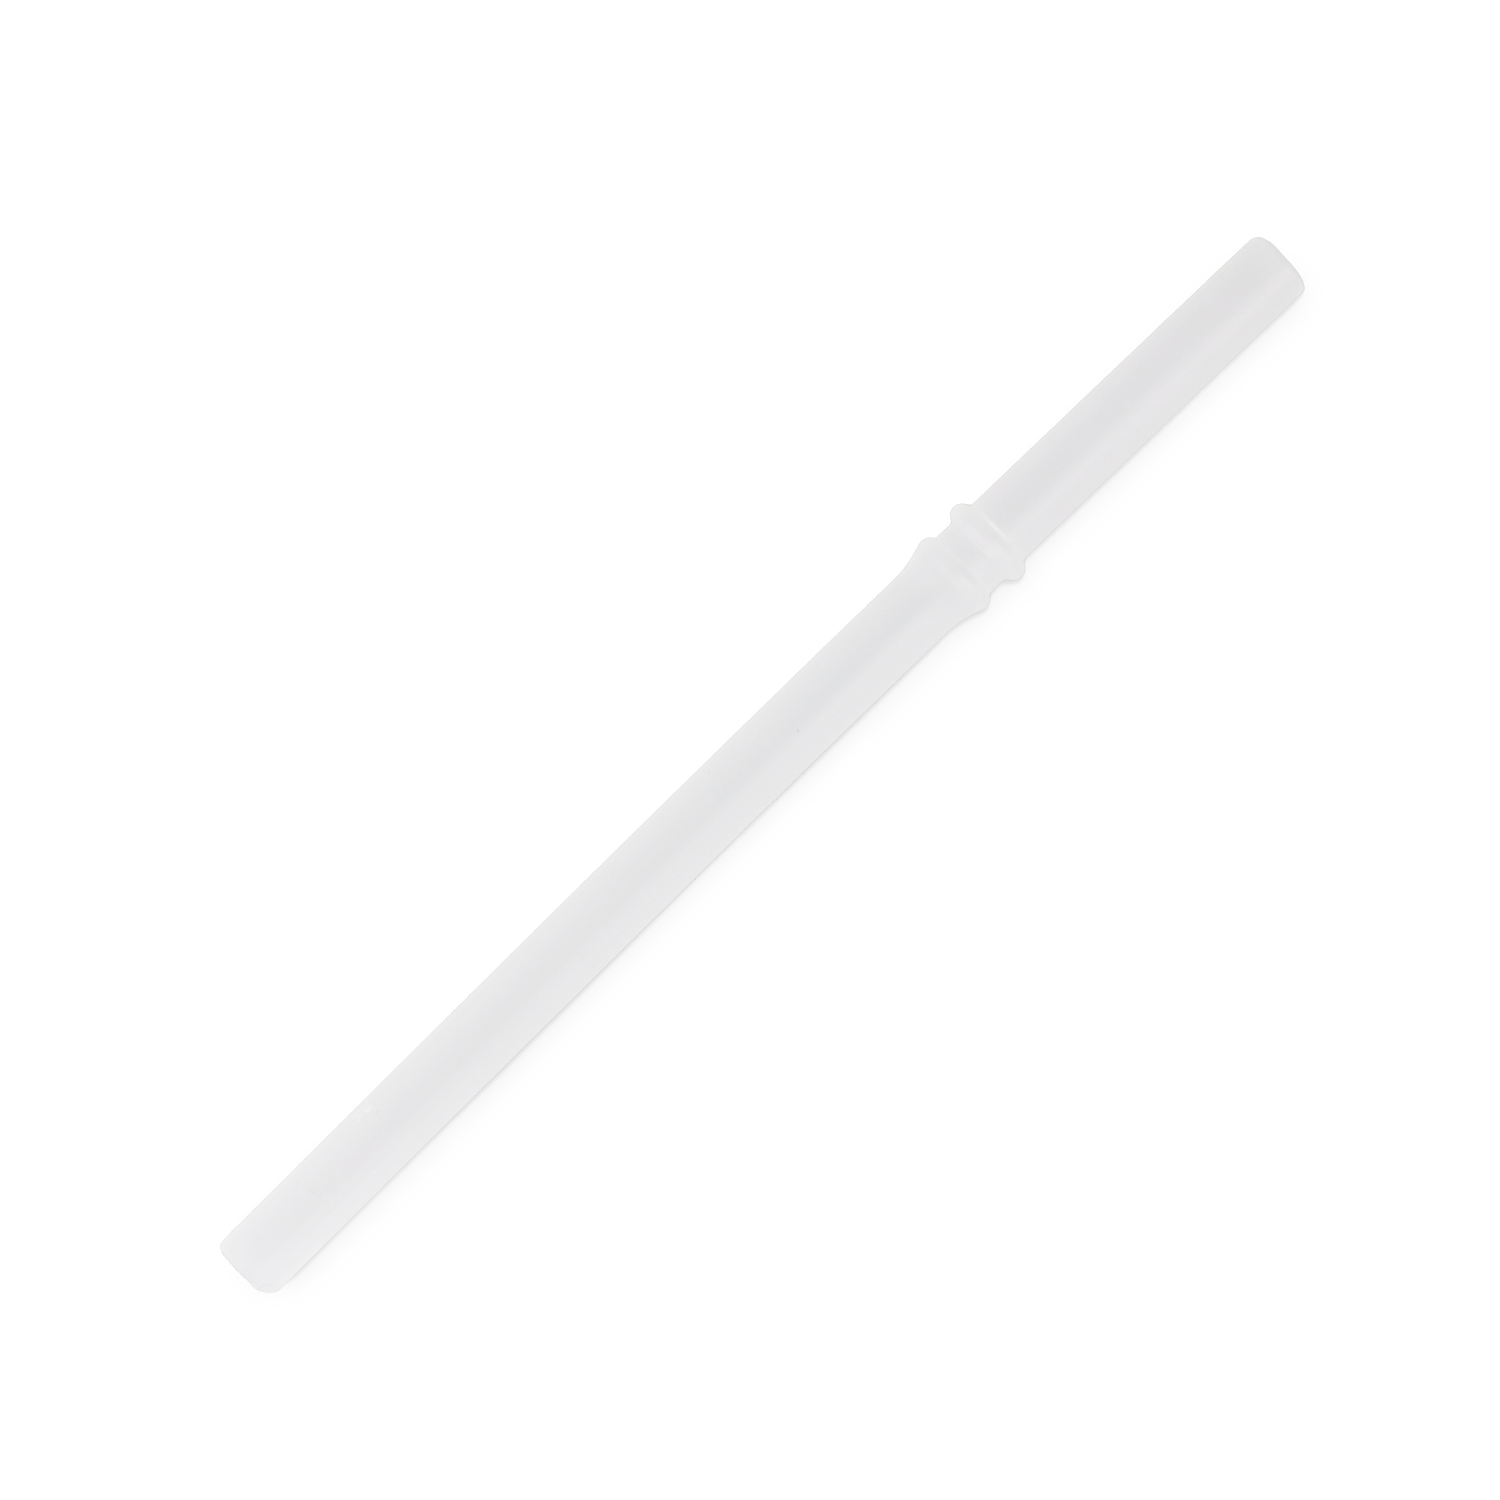 Reusable Soft LSR Silicone Replacement Straw for Feeding Water